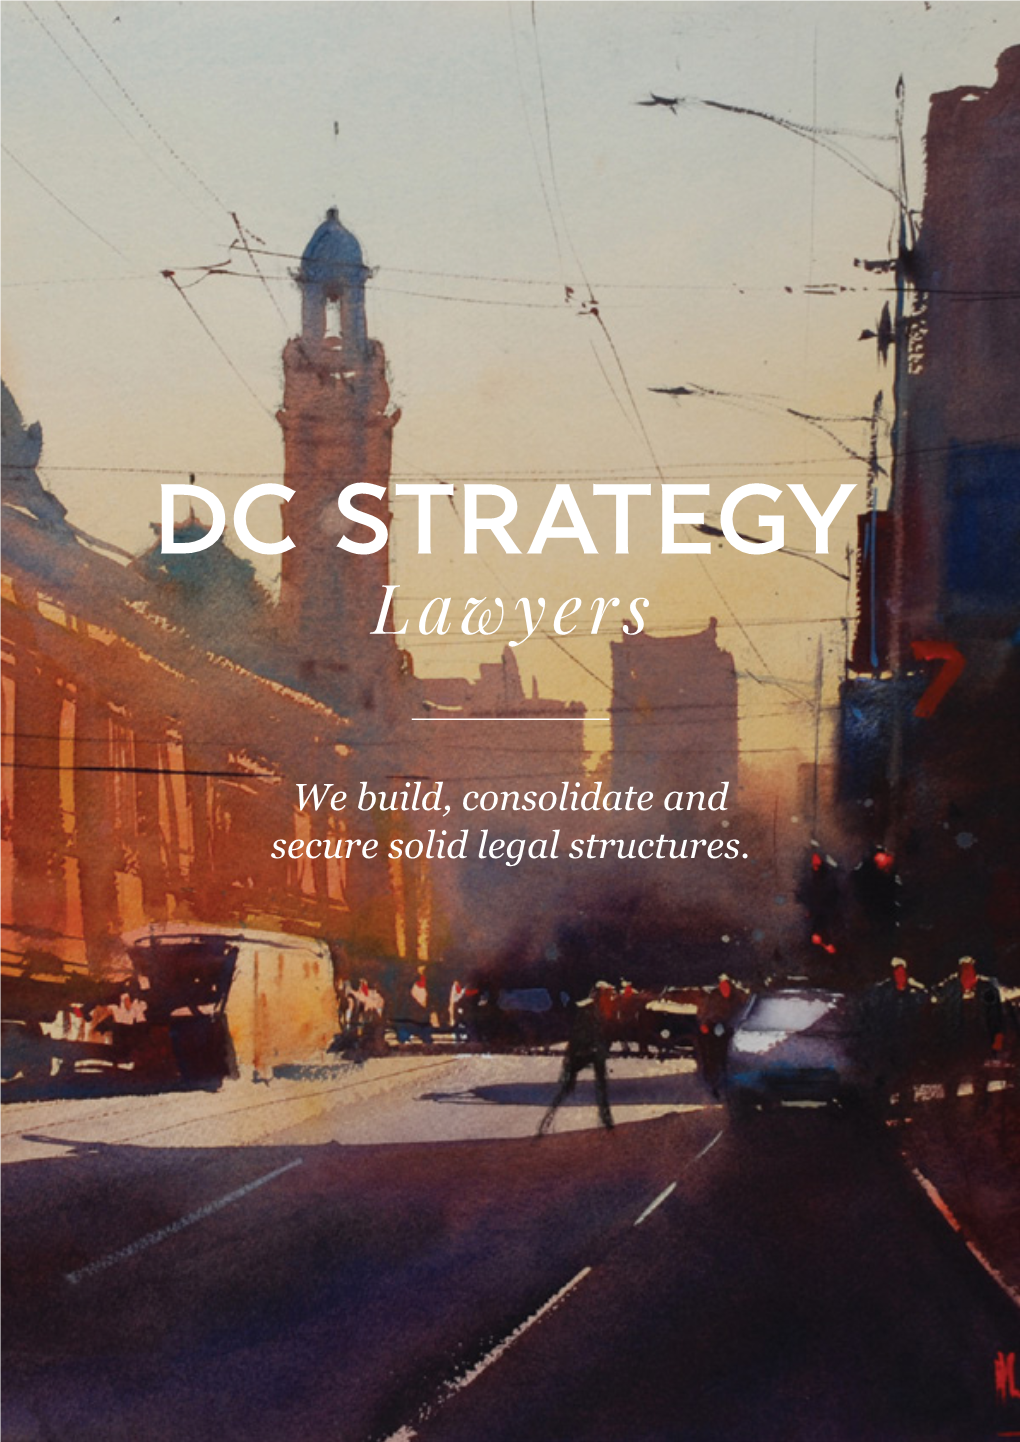 Who Is DC Strategy?